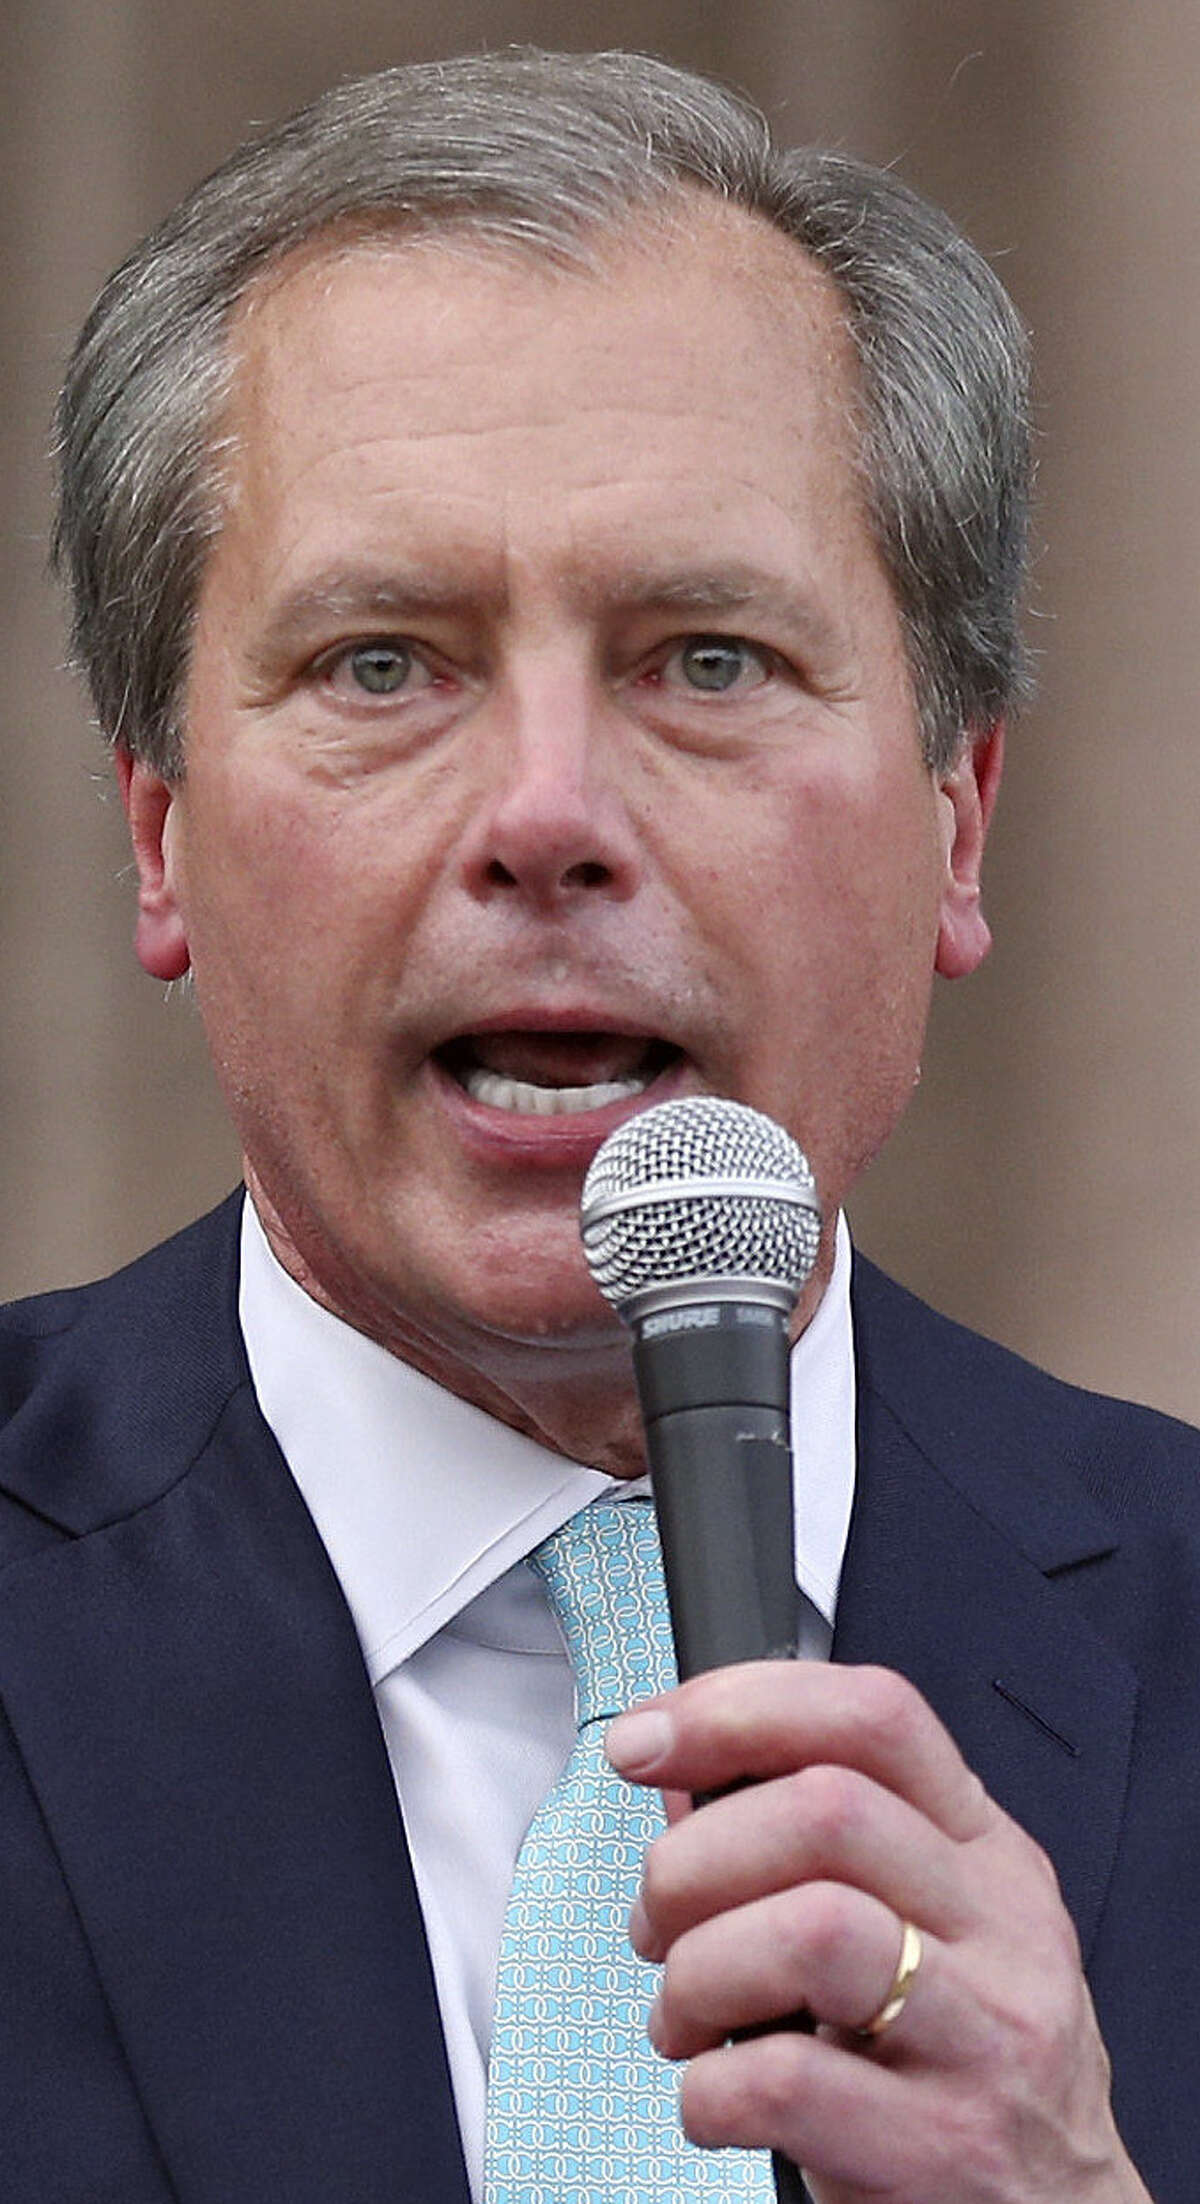 In the primary, David Dewhurst (above) trailed Dan Patrick by 13 percentage points in a four-way race.